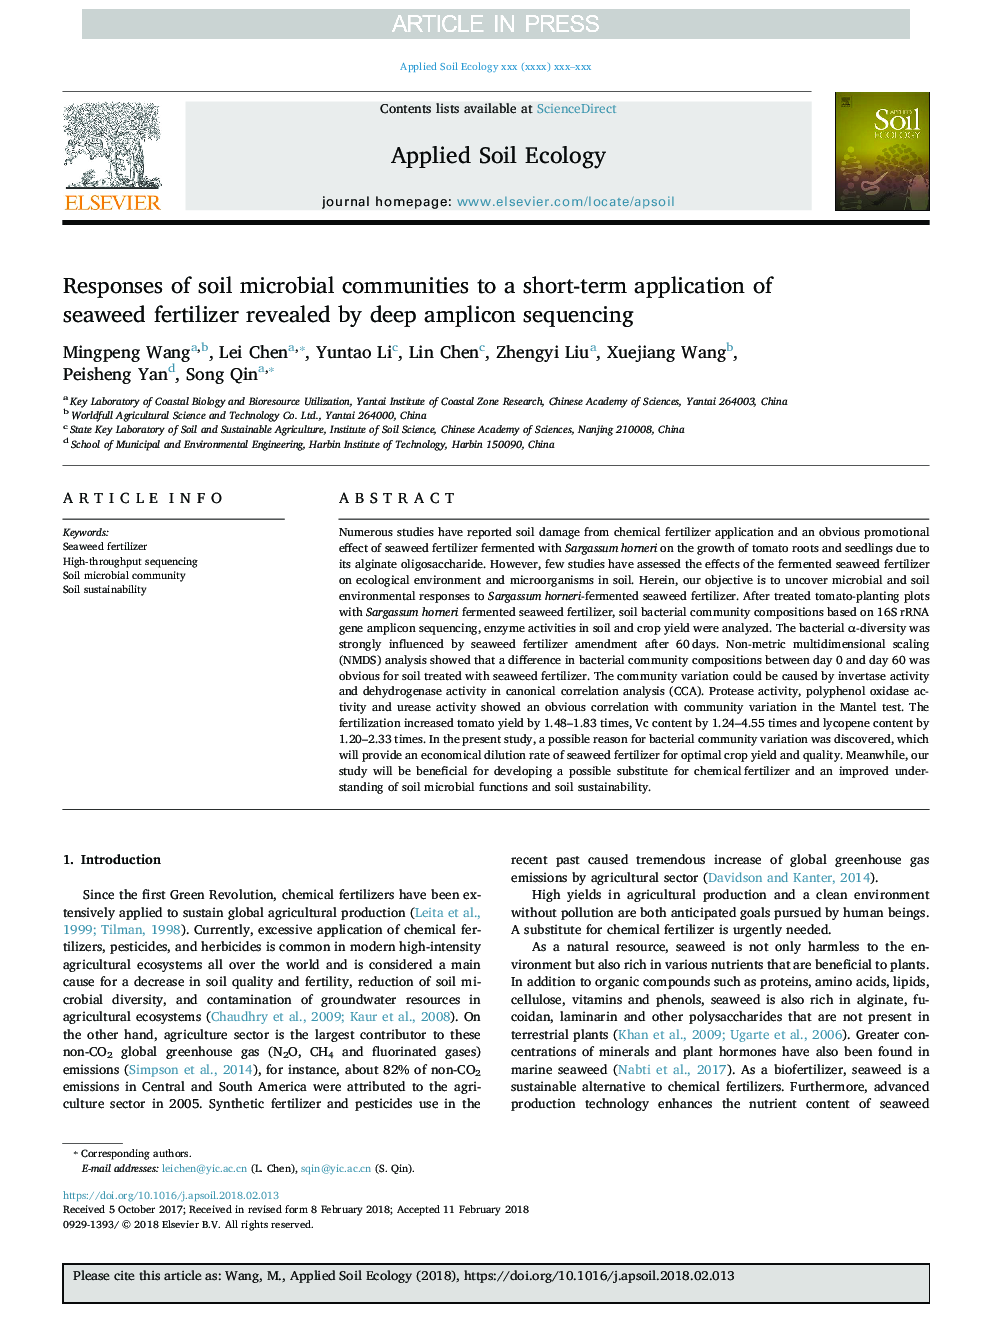 Responses of soil microbial communities to a short-term application of seaweed fertilizer revealed by deep amplicon sequencing